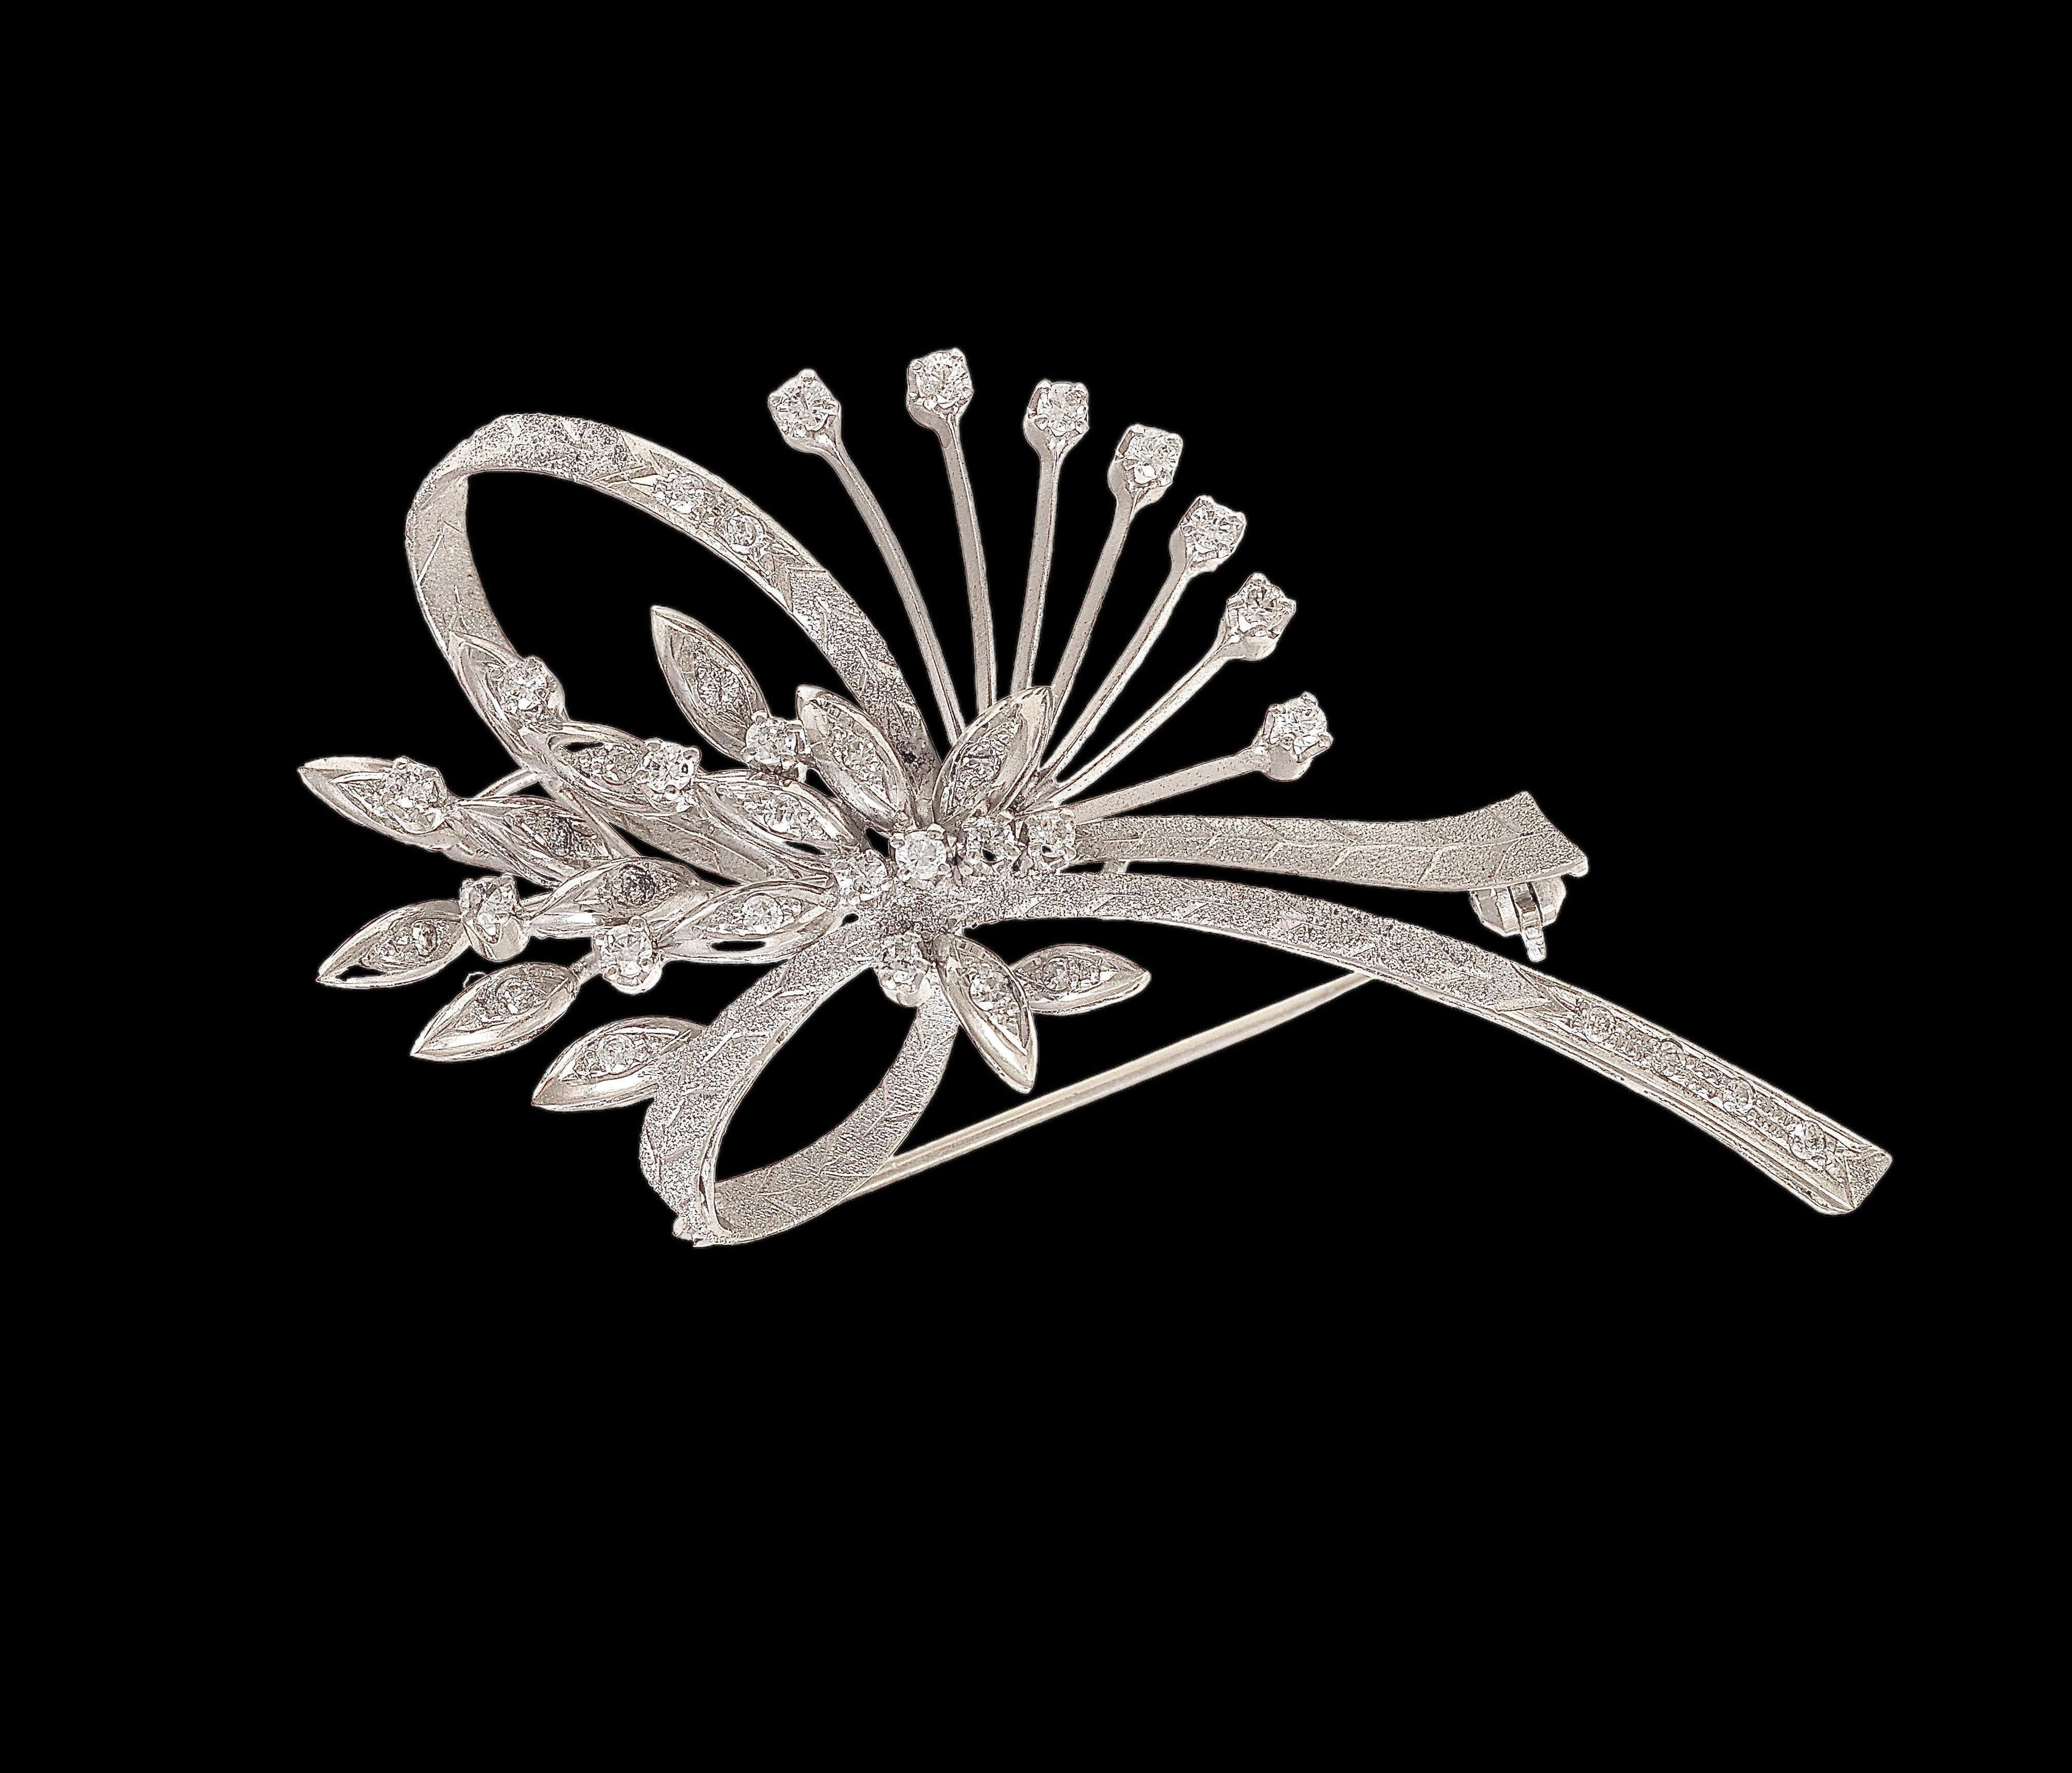  18 kt. White Gold Brooch with 1.52 ct. Brilliant Cut Diamonds For Sale 5